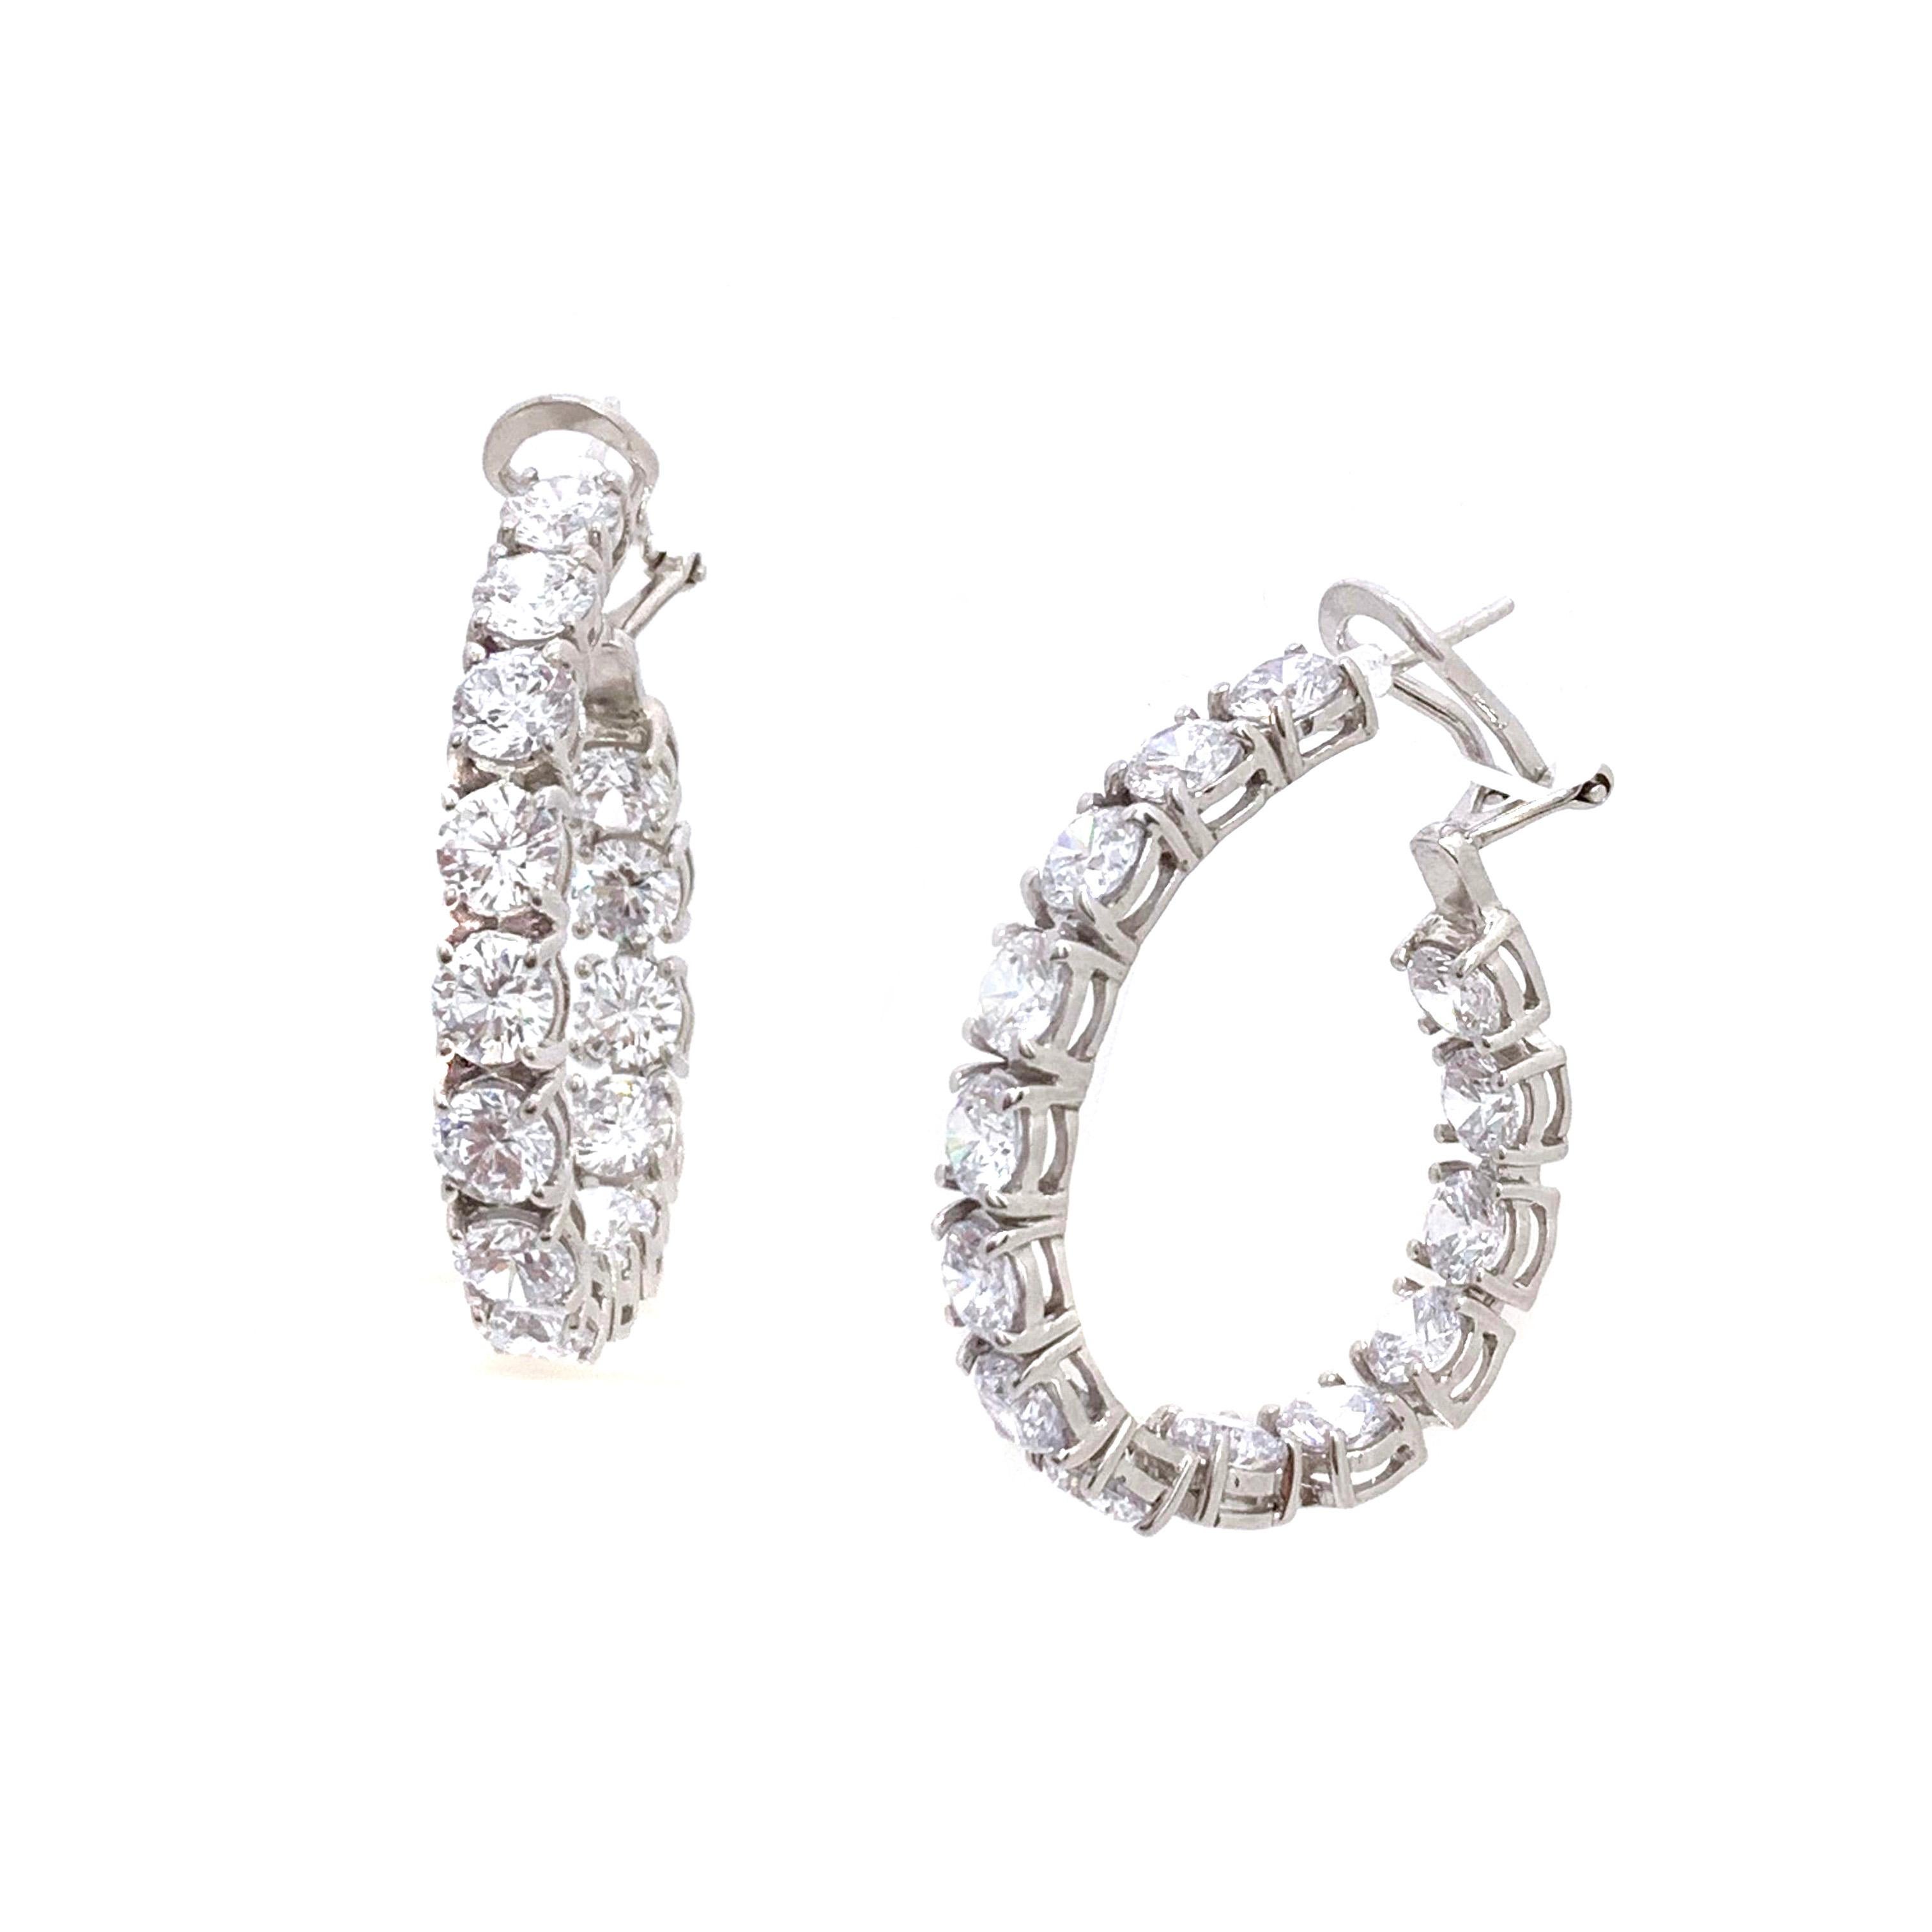 Stunning Simulated Diamond Sterling Silver Hoop Earrings. Each stone is equal to a size of 0.5ct, all set facing forward, handset in platinum rhodium plated sterling silver. Straight post with omega clip back. 1.5